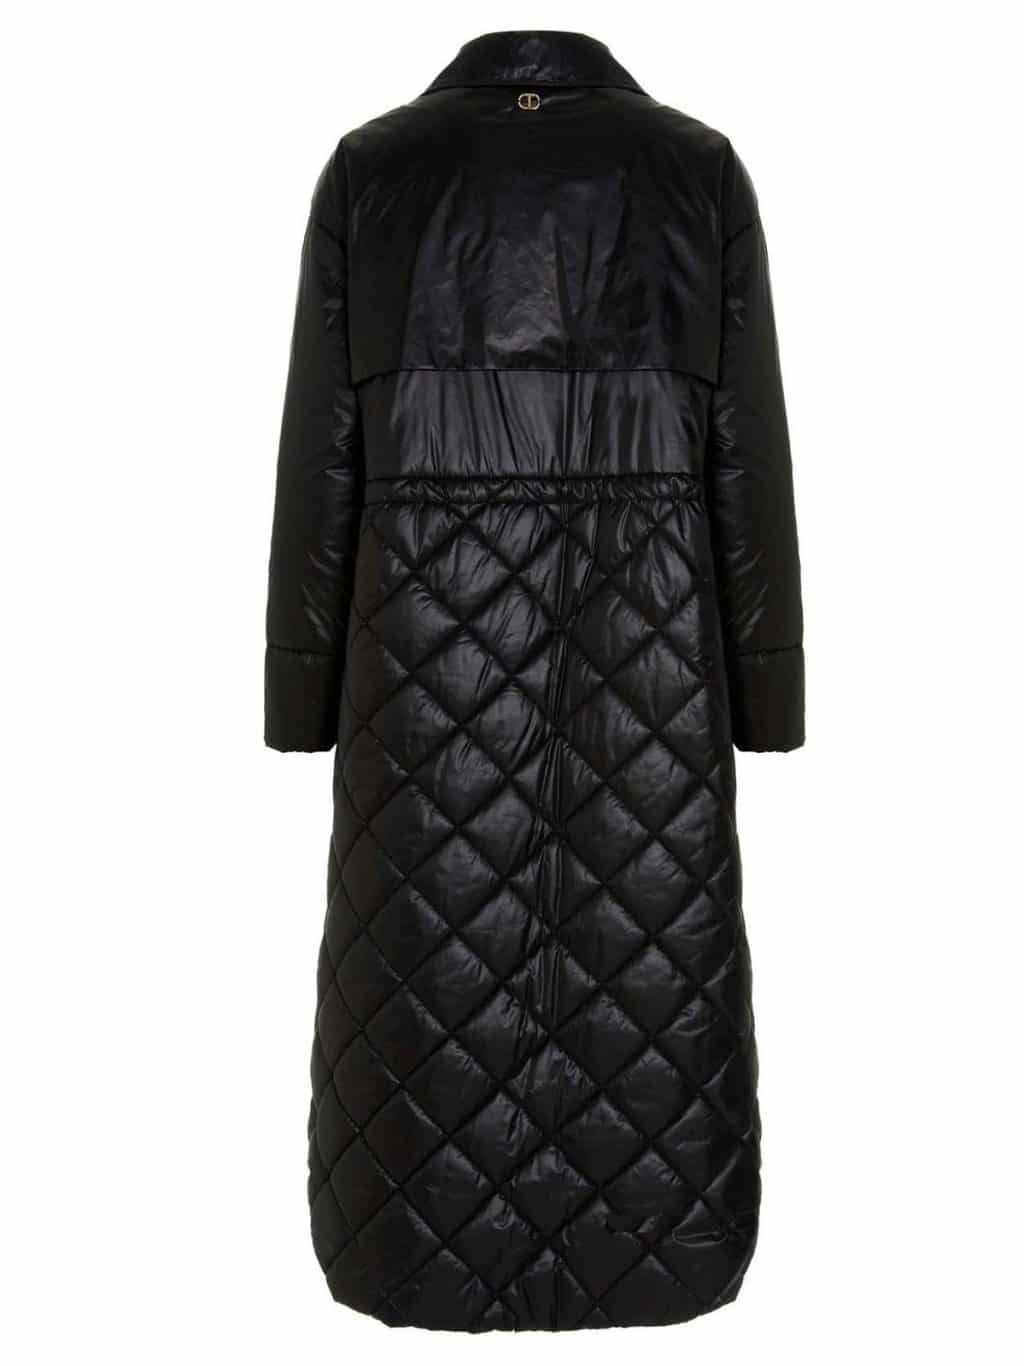 Clothing Twinset quilted black puffer